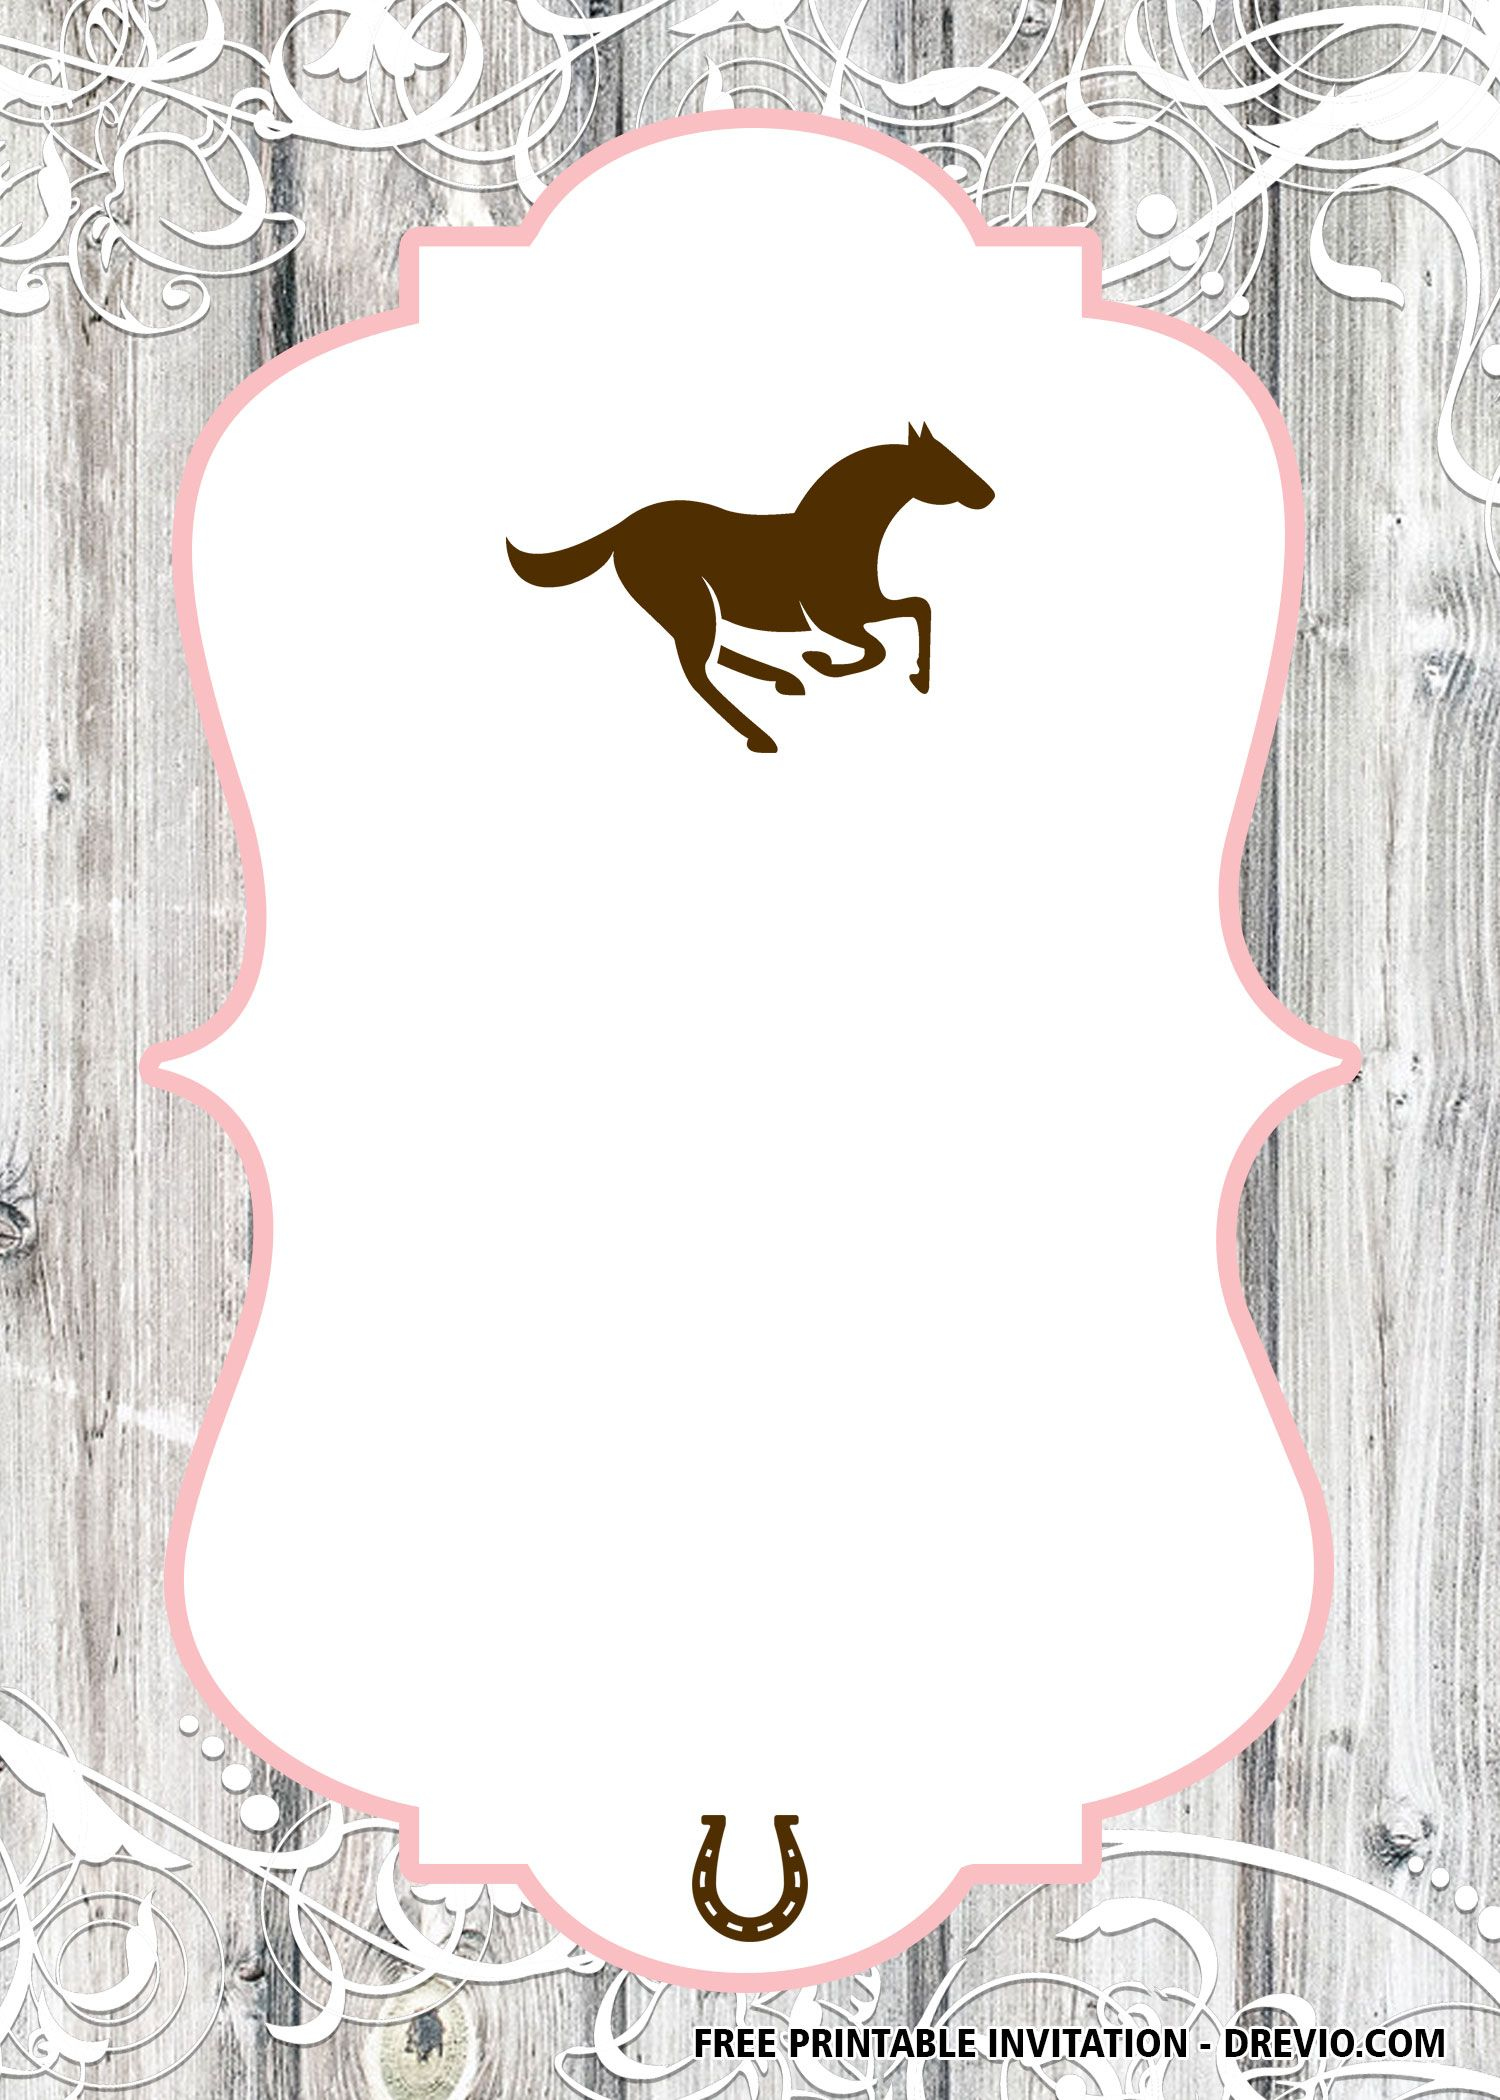 Saddle Up With Free Horse Invitation Templates for Free Printable Horse Themed Birthday Party Invitations